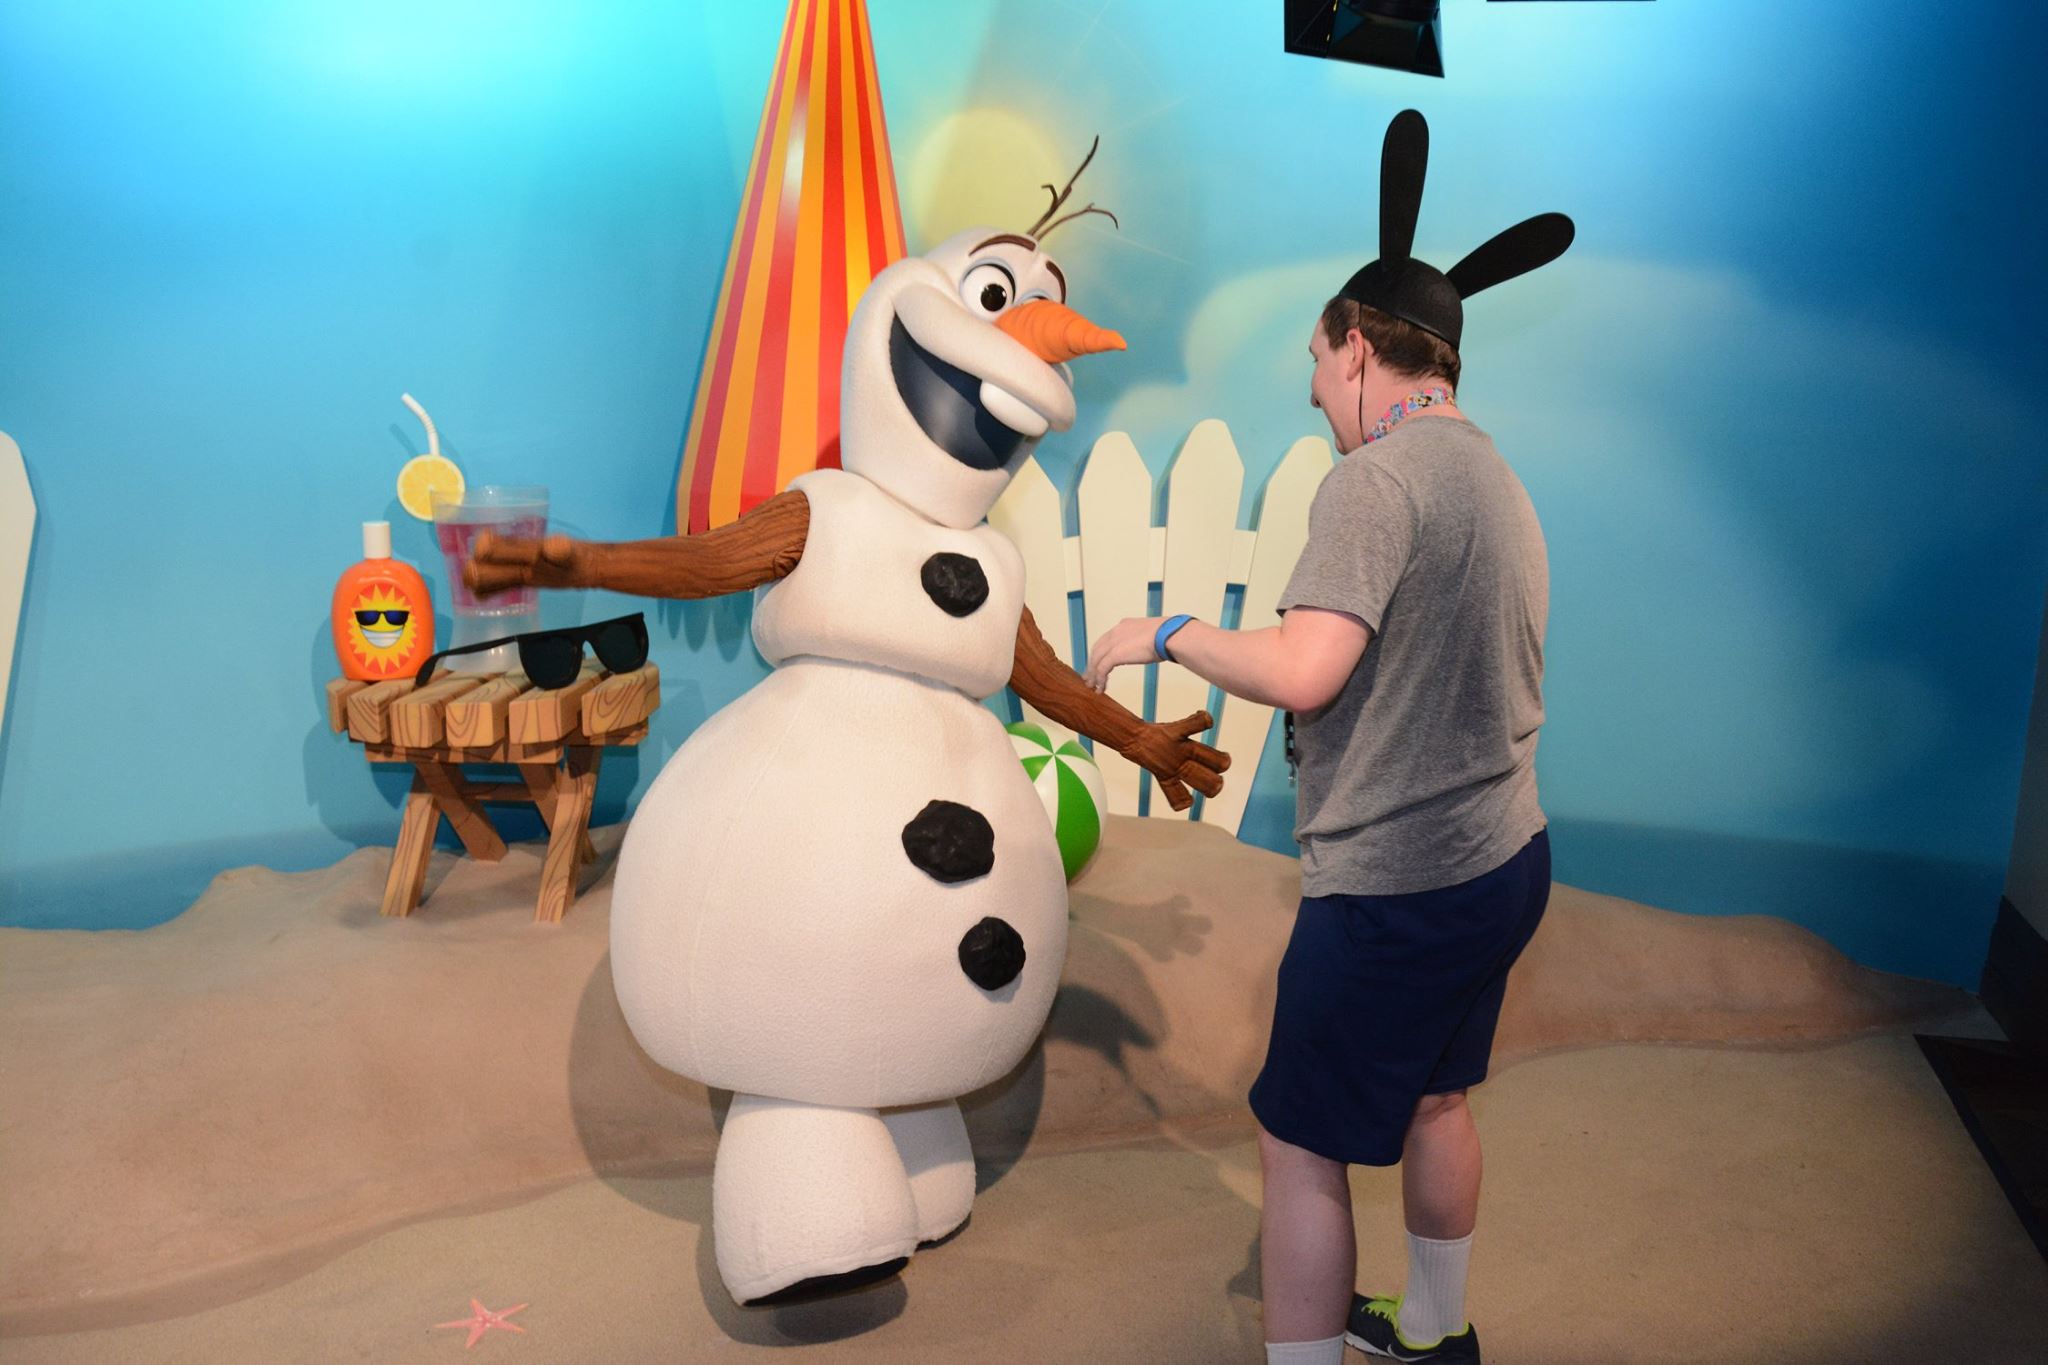 Positief Seminarie Sluimeren Me Singing and Dancing "In Summer" to Olaf | WDWMAGIC - Unofficial Walt  Disney World discussion forums